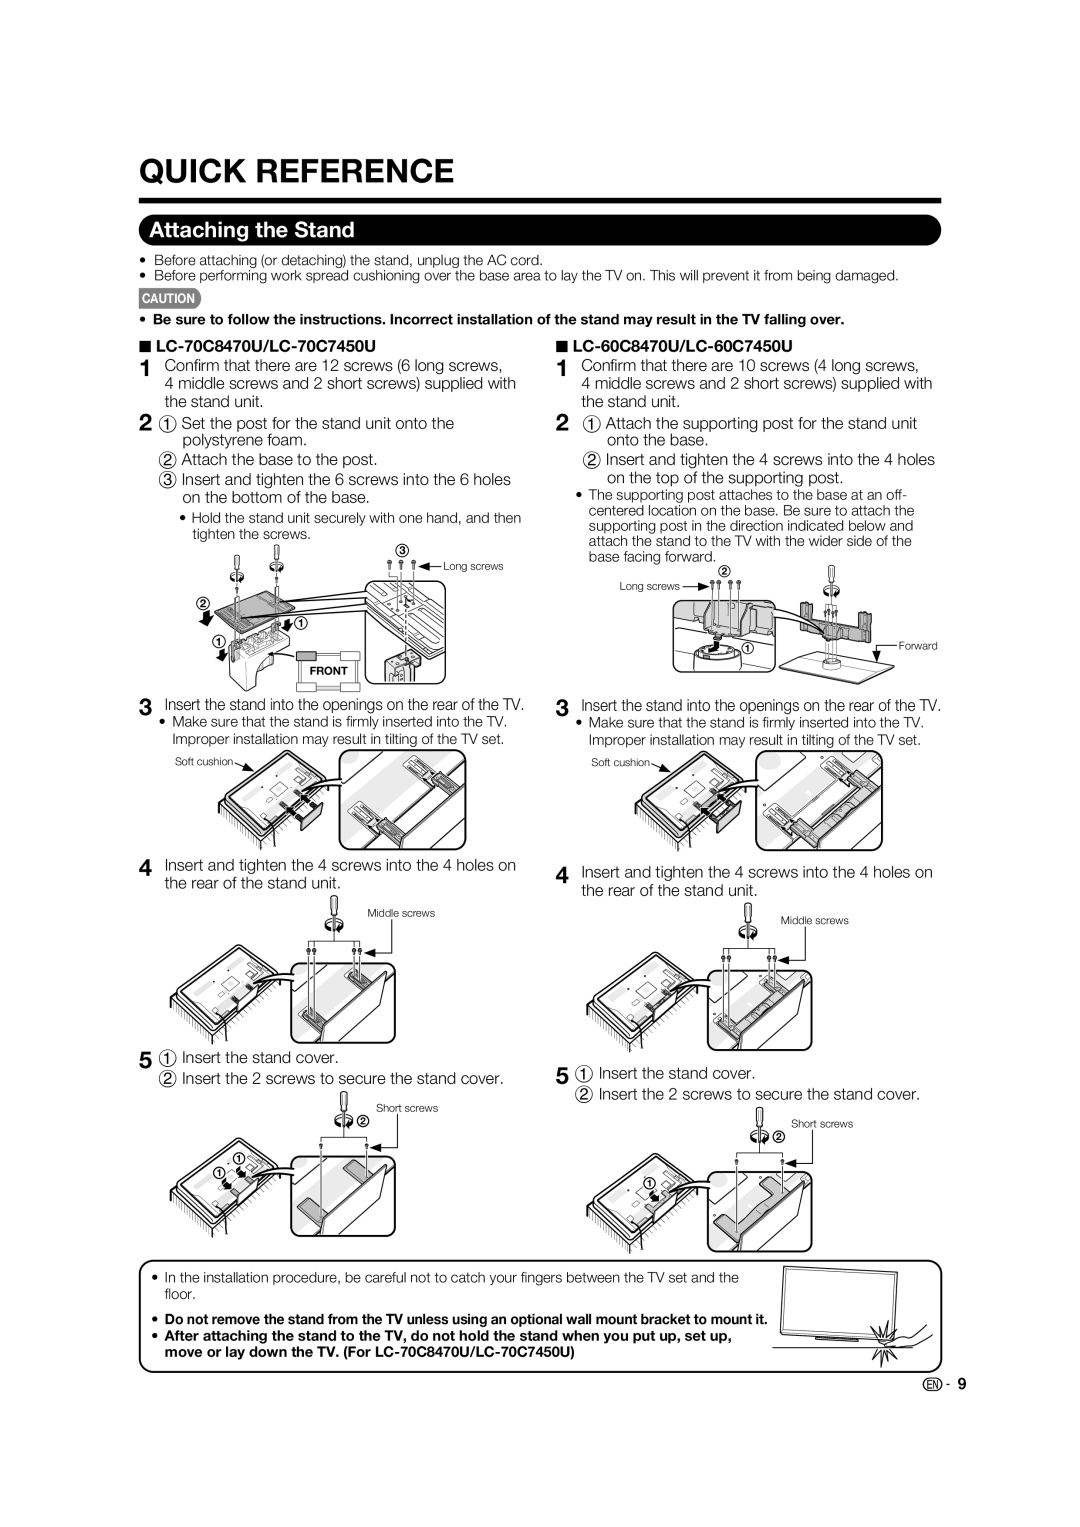 Sharp operation manual Quick Reference, Attaching the Stand, LC-70C8470U/LC-70C7450U, LC-60C8470U/LC-60C7450U 